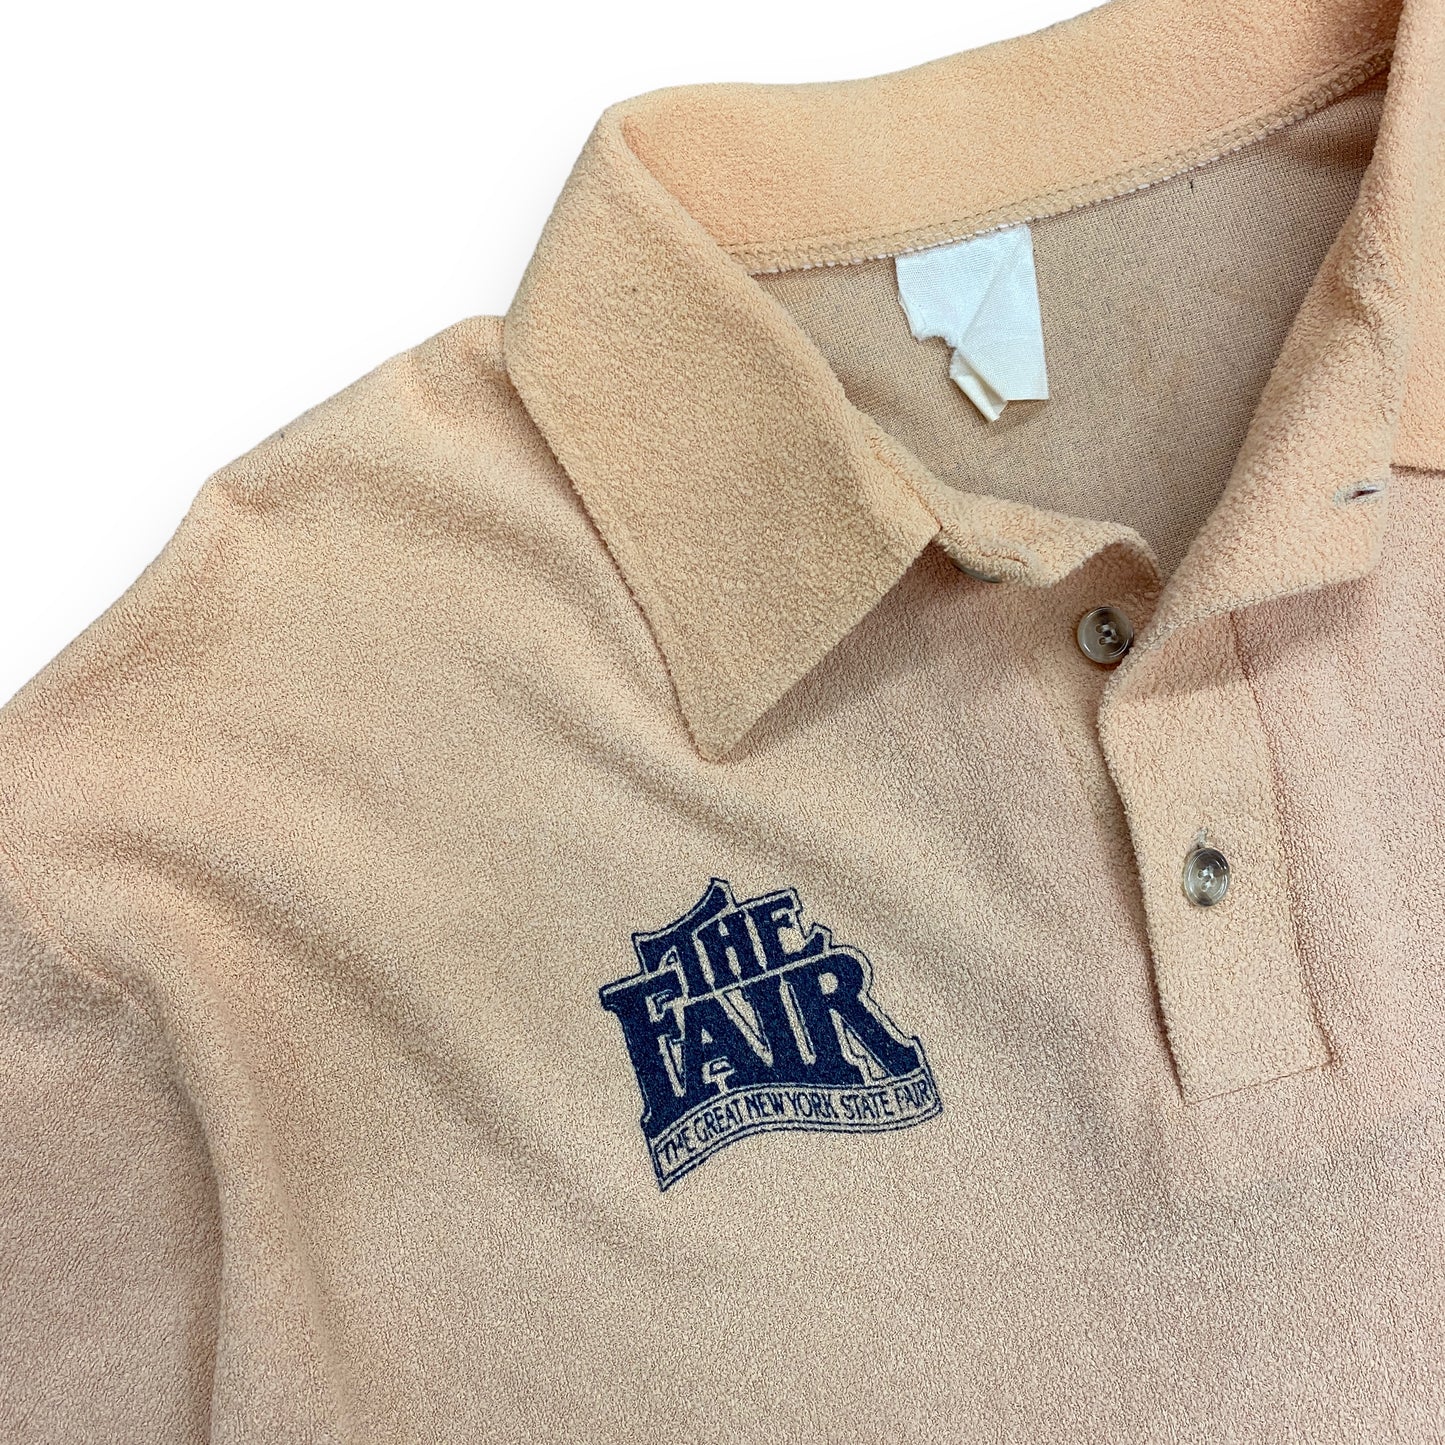 Vintage 1970s New York State Fair Terry Cloth Polo - Size Large